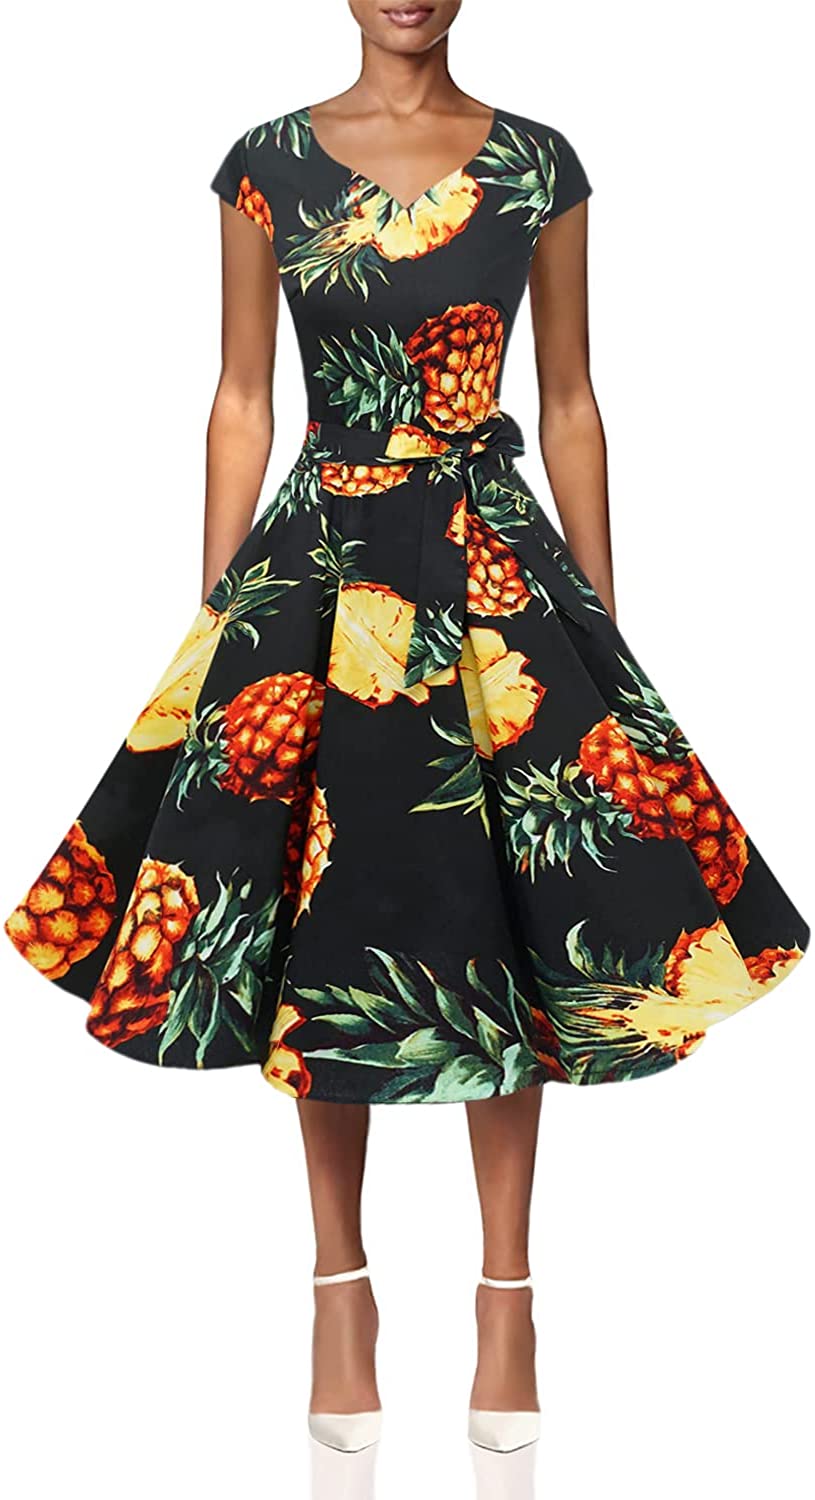 GUTTEAR Womens Vintage Sleeveless Print Casual Evening Party Prom Swing Dress 